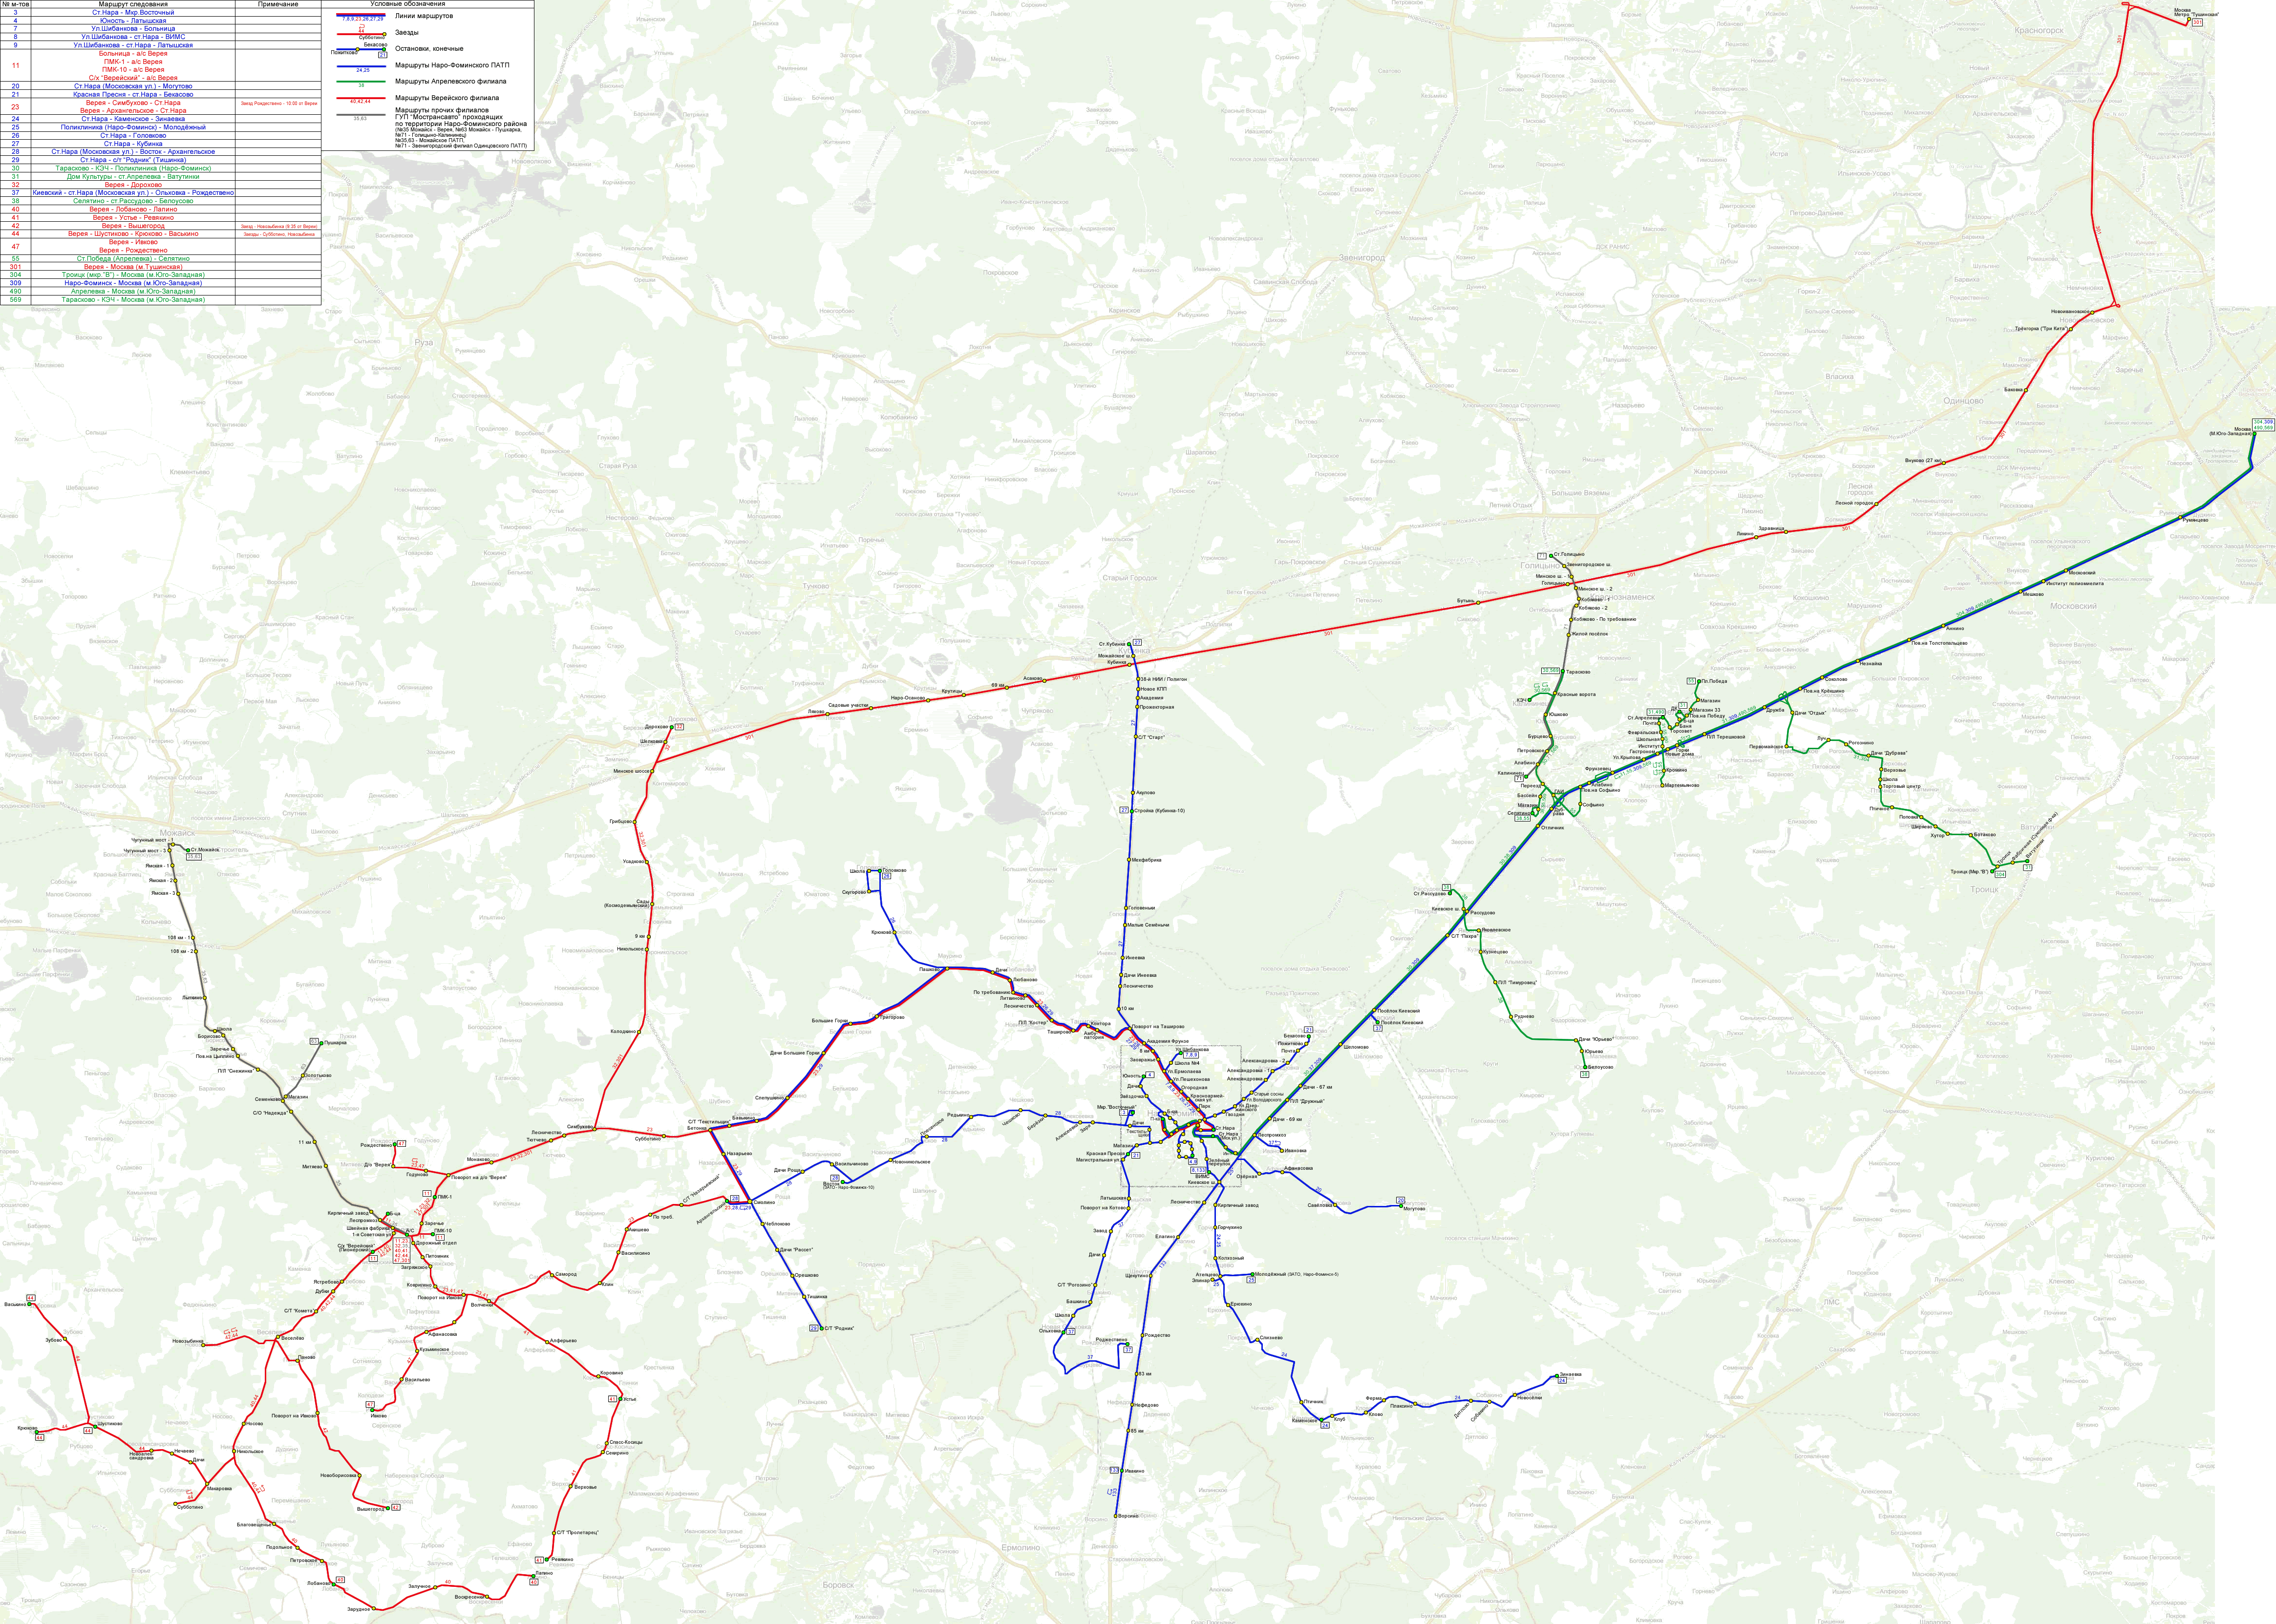 Naro-Fominsk — Maps; Maps routes